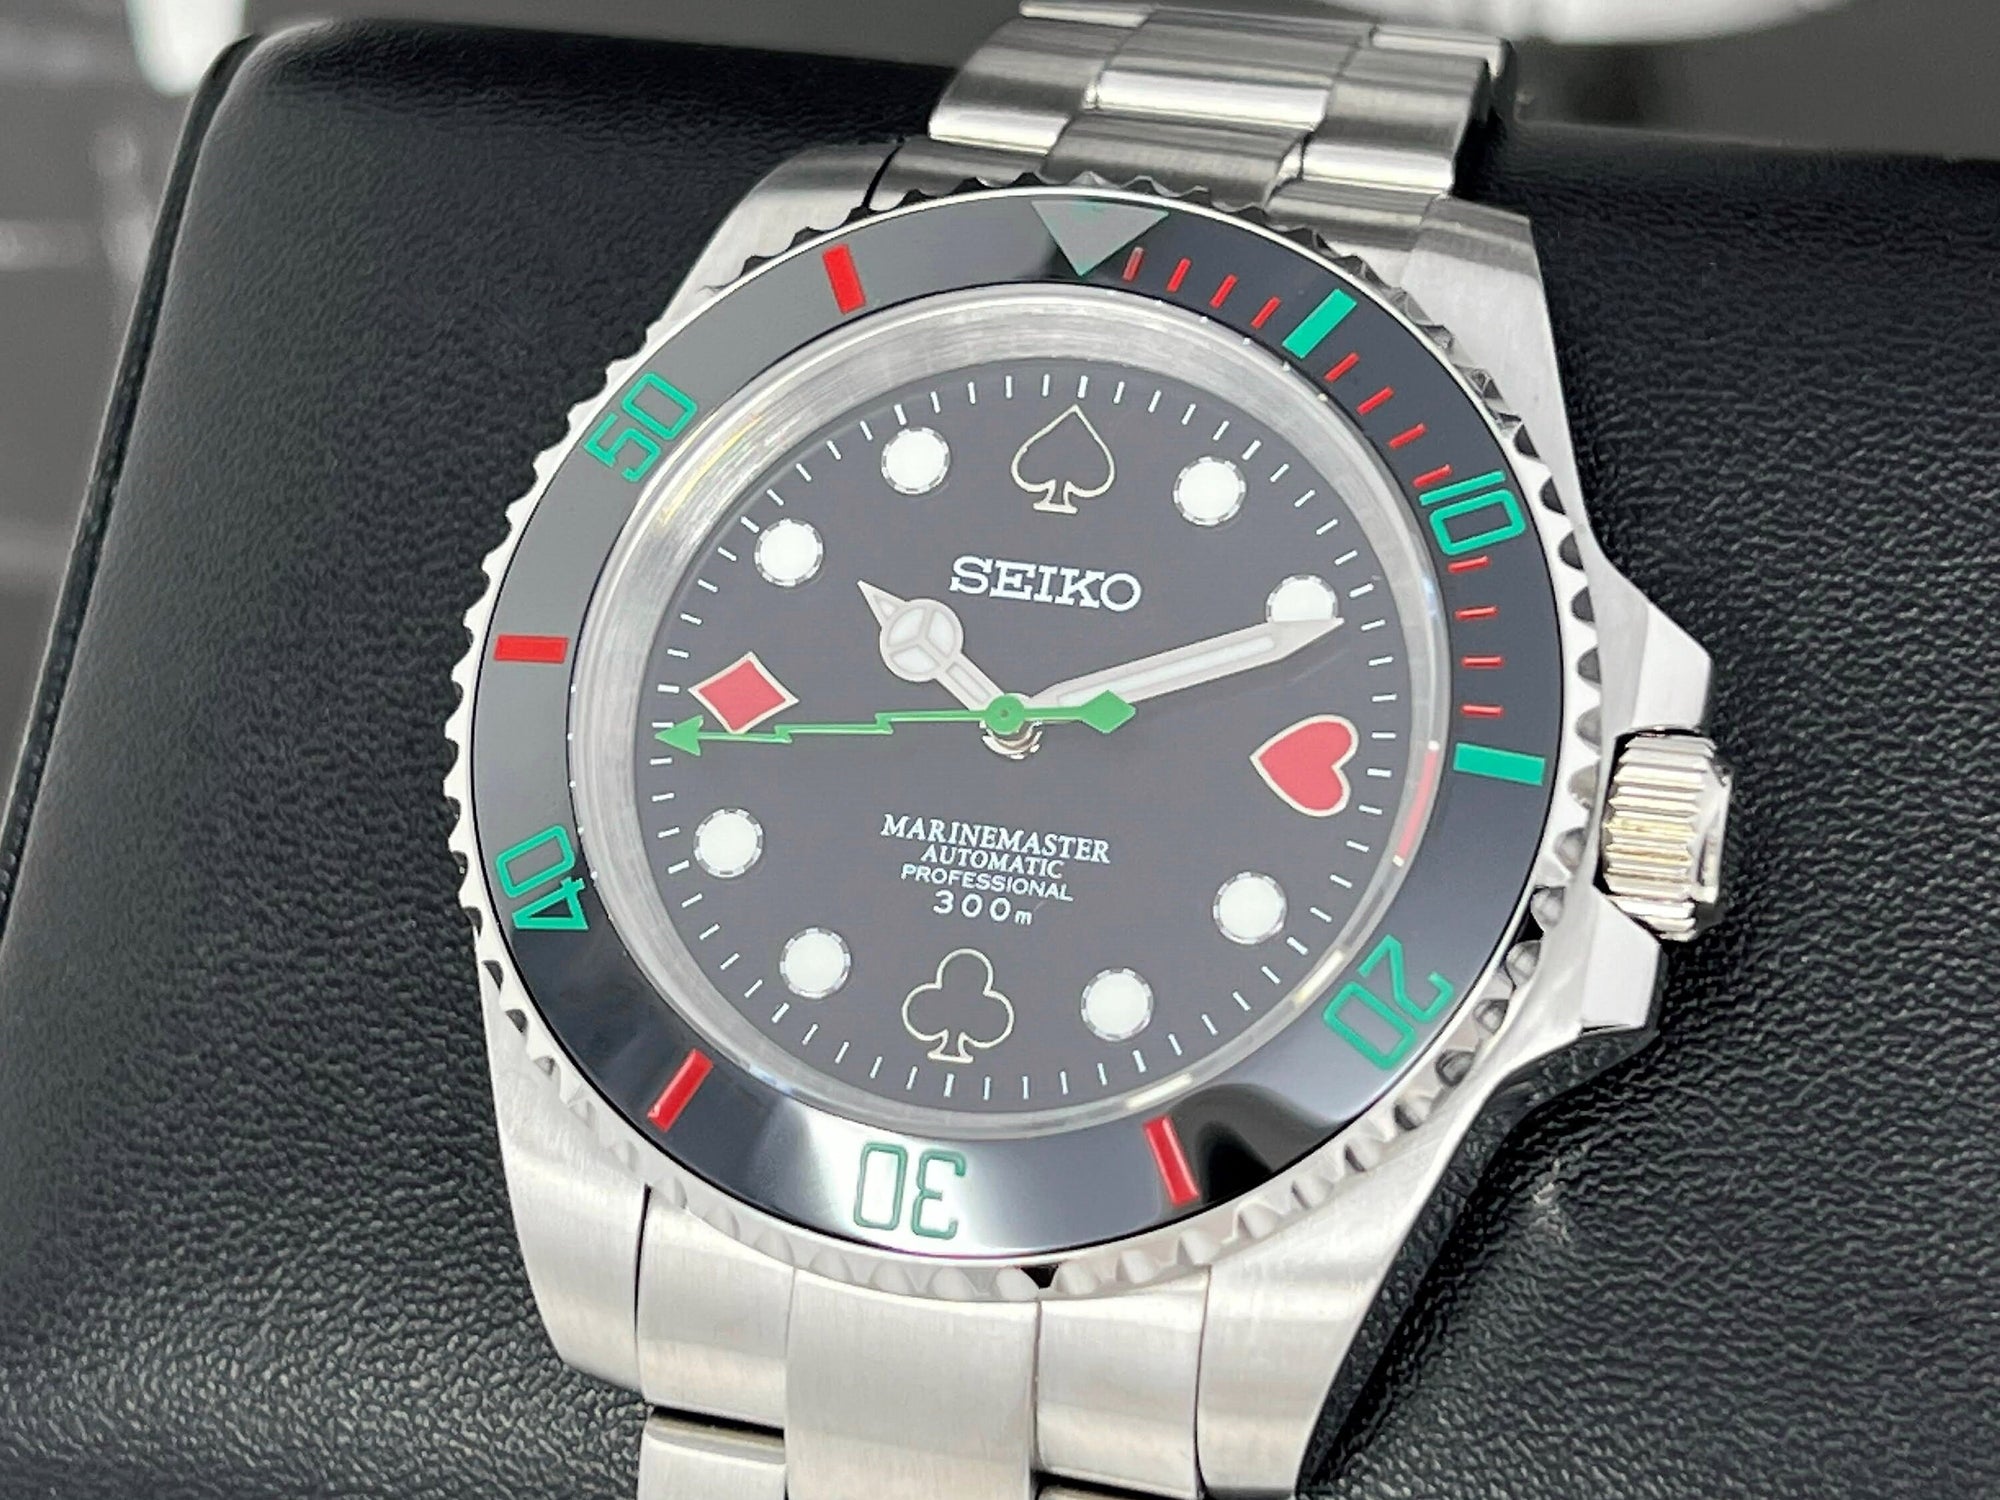 Seiko Casino Royale Submariner | Stainless Steel | Sapphire Crystal | Oyster Bracelet | Ceramic Bezel | Seiko Mod | NH35 | Poker Chips Cards